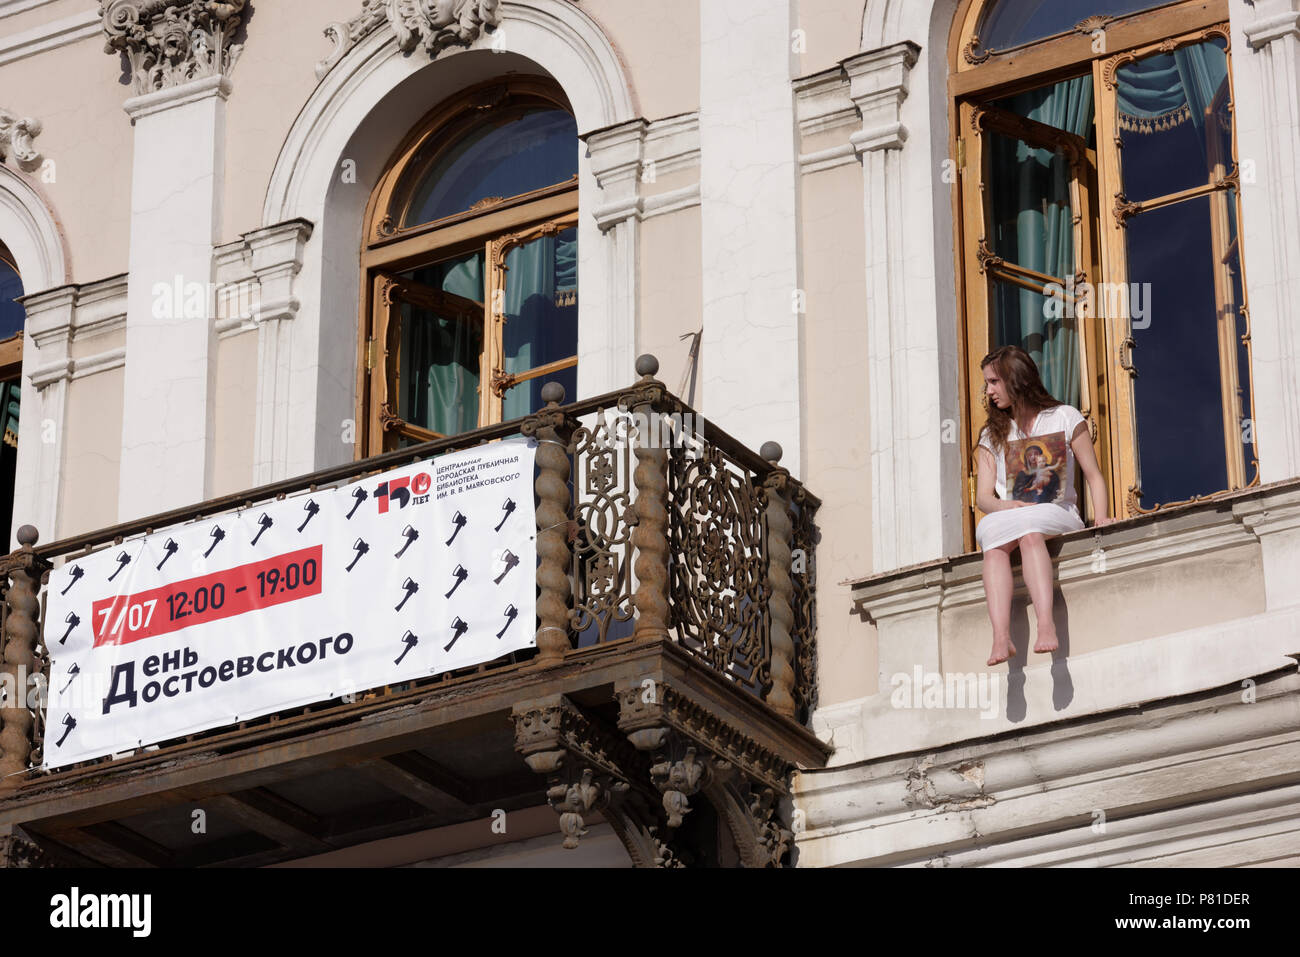 St. Petersburg, Russia - July 7, 2018: Performance in the Mayakovsky library to promote the Dostoevsky Day in Saint Petersburg. This annual event is h Stock Photo